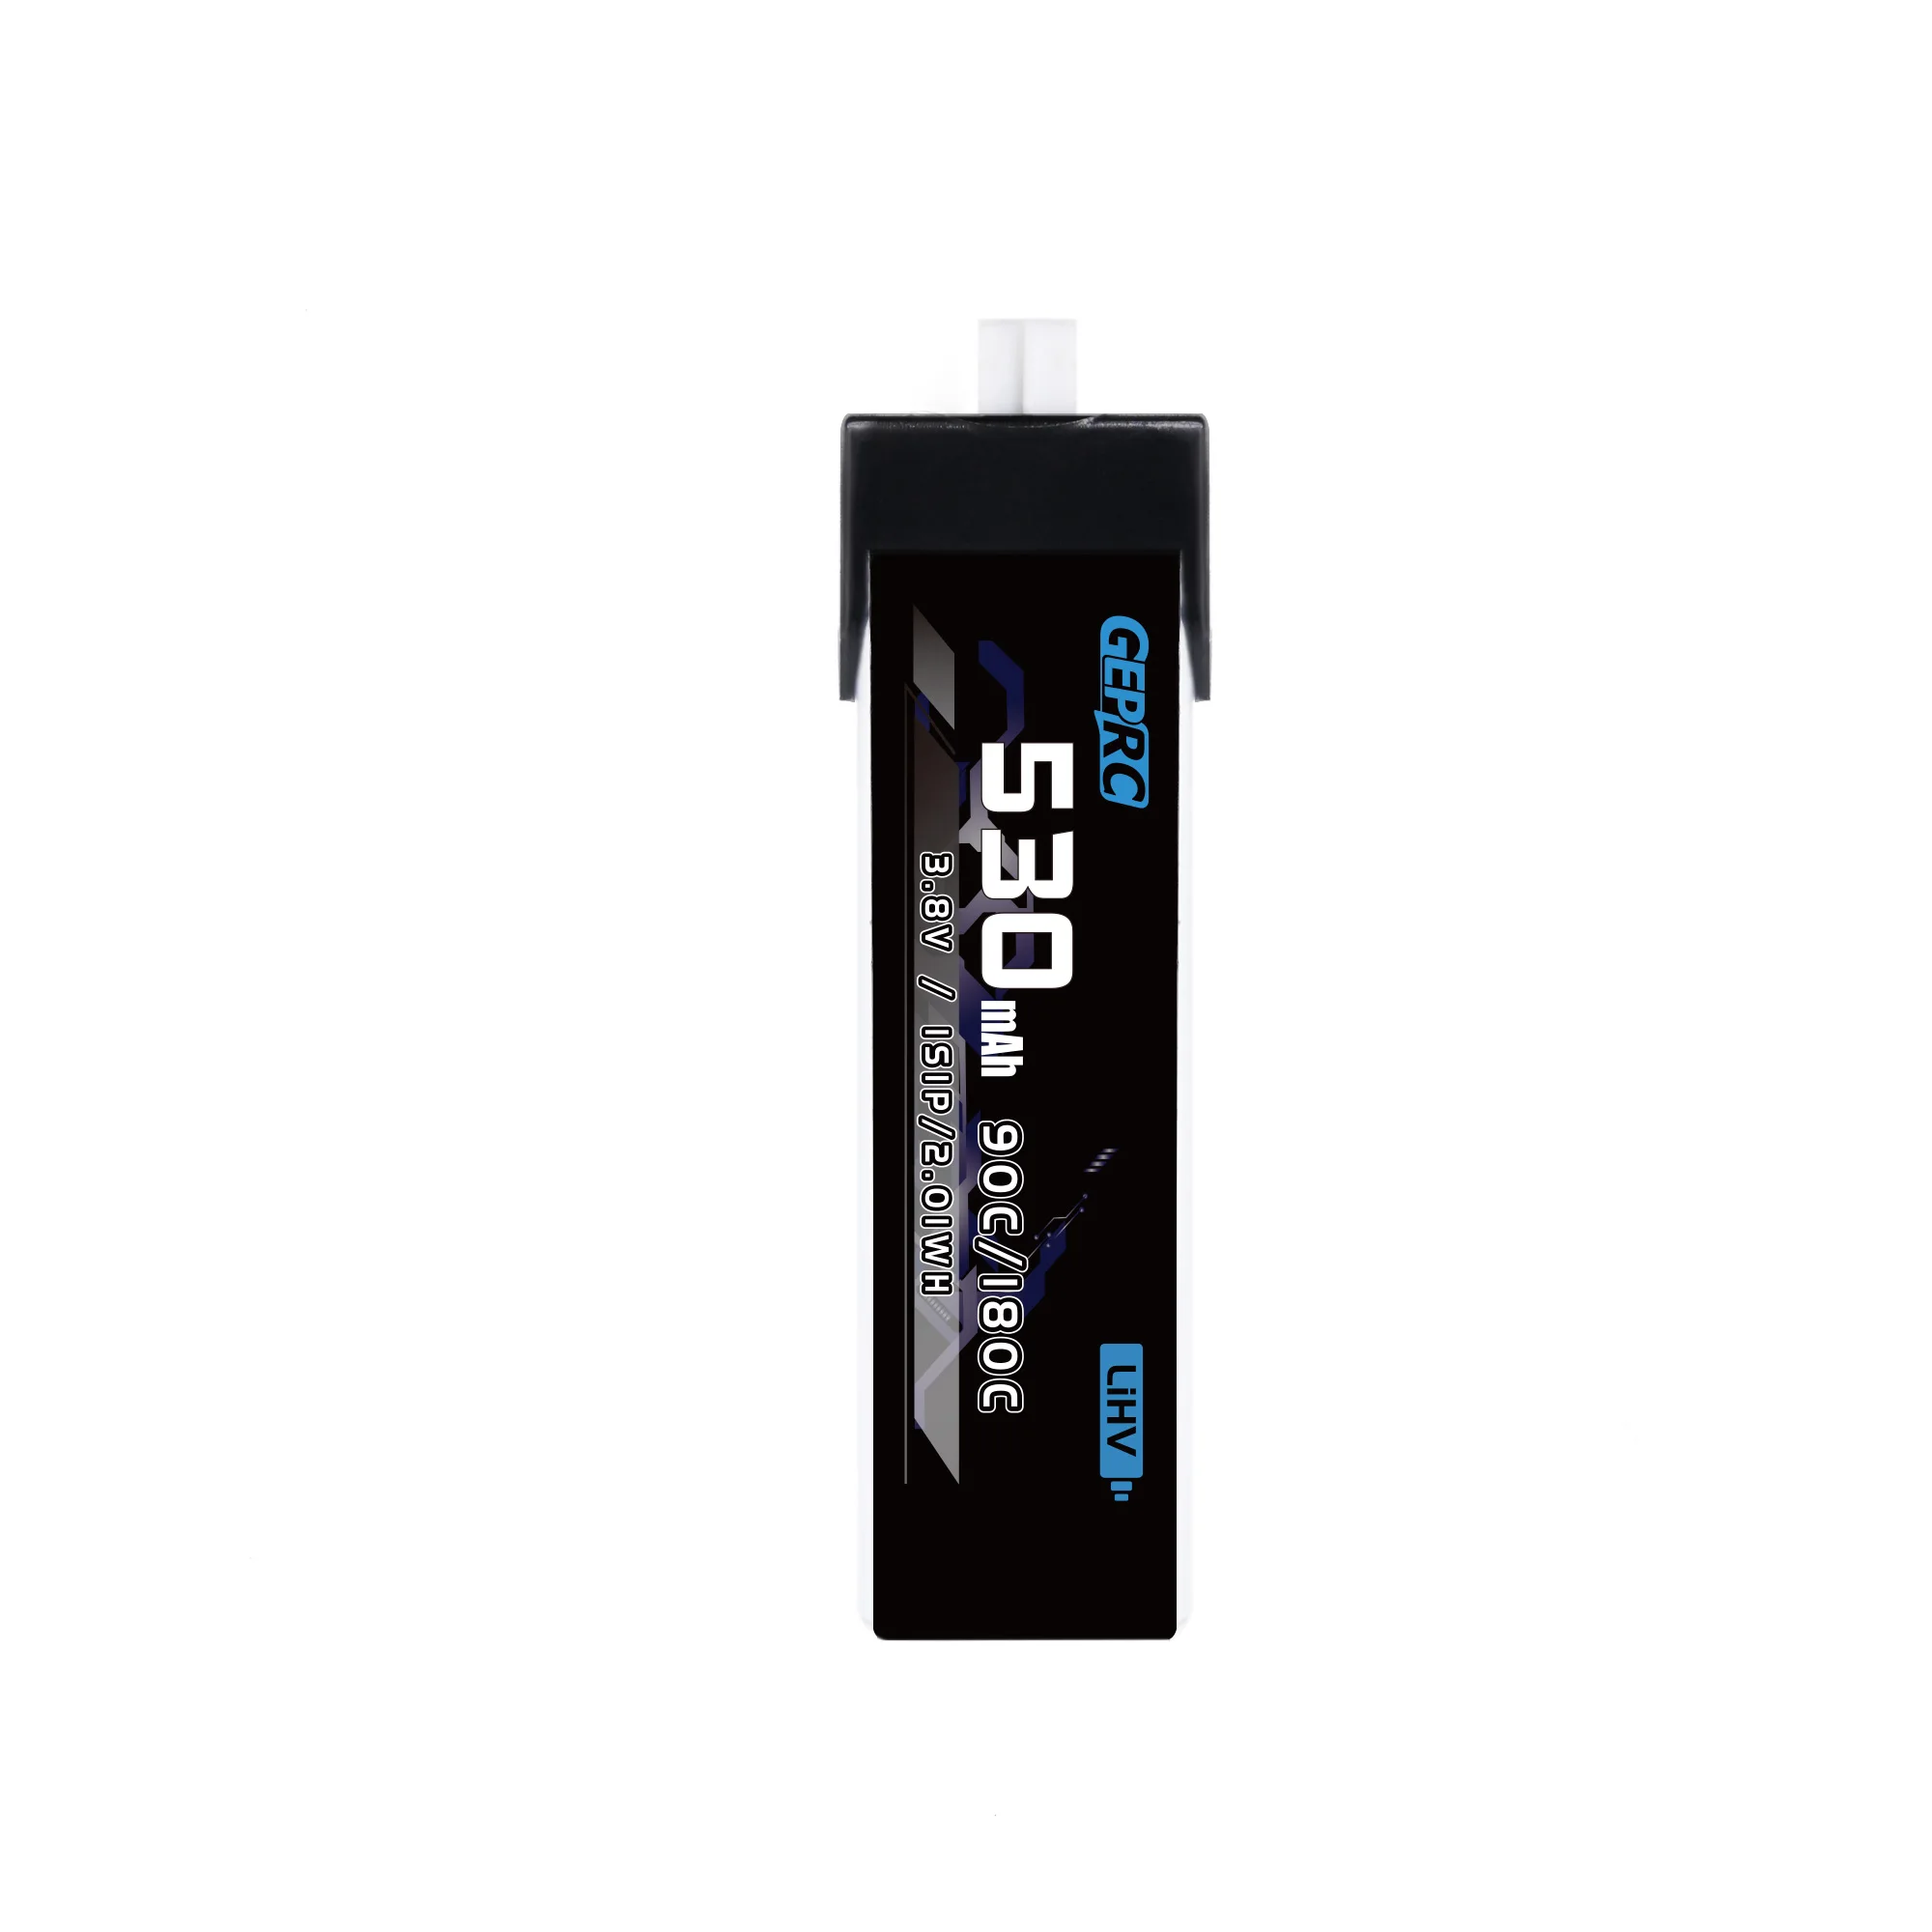 GEPRC 1S 530mAh Batteries, a charge-discharge activation is performed within 3 months to maintain the stability of